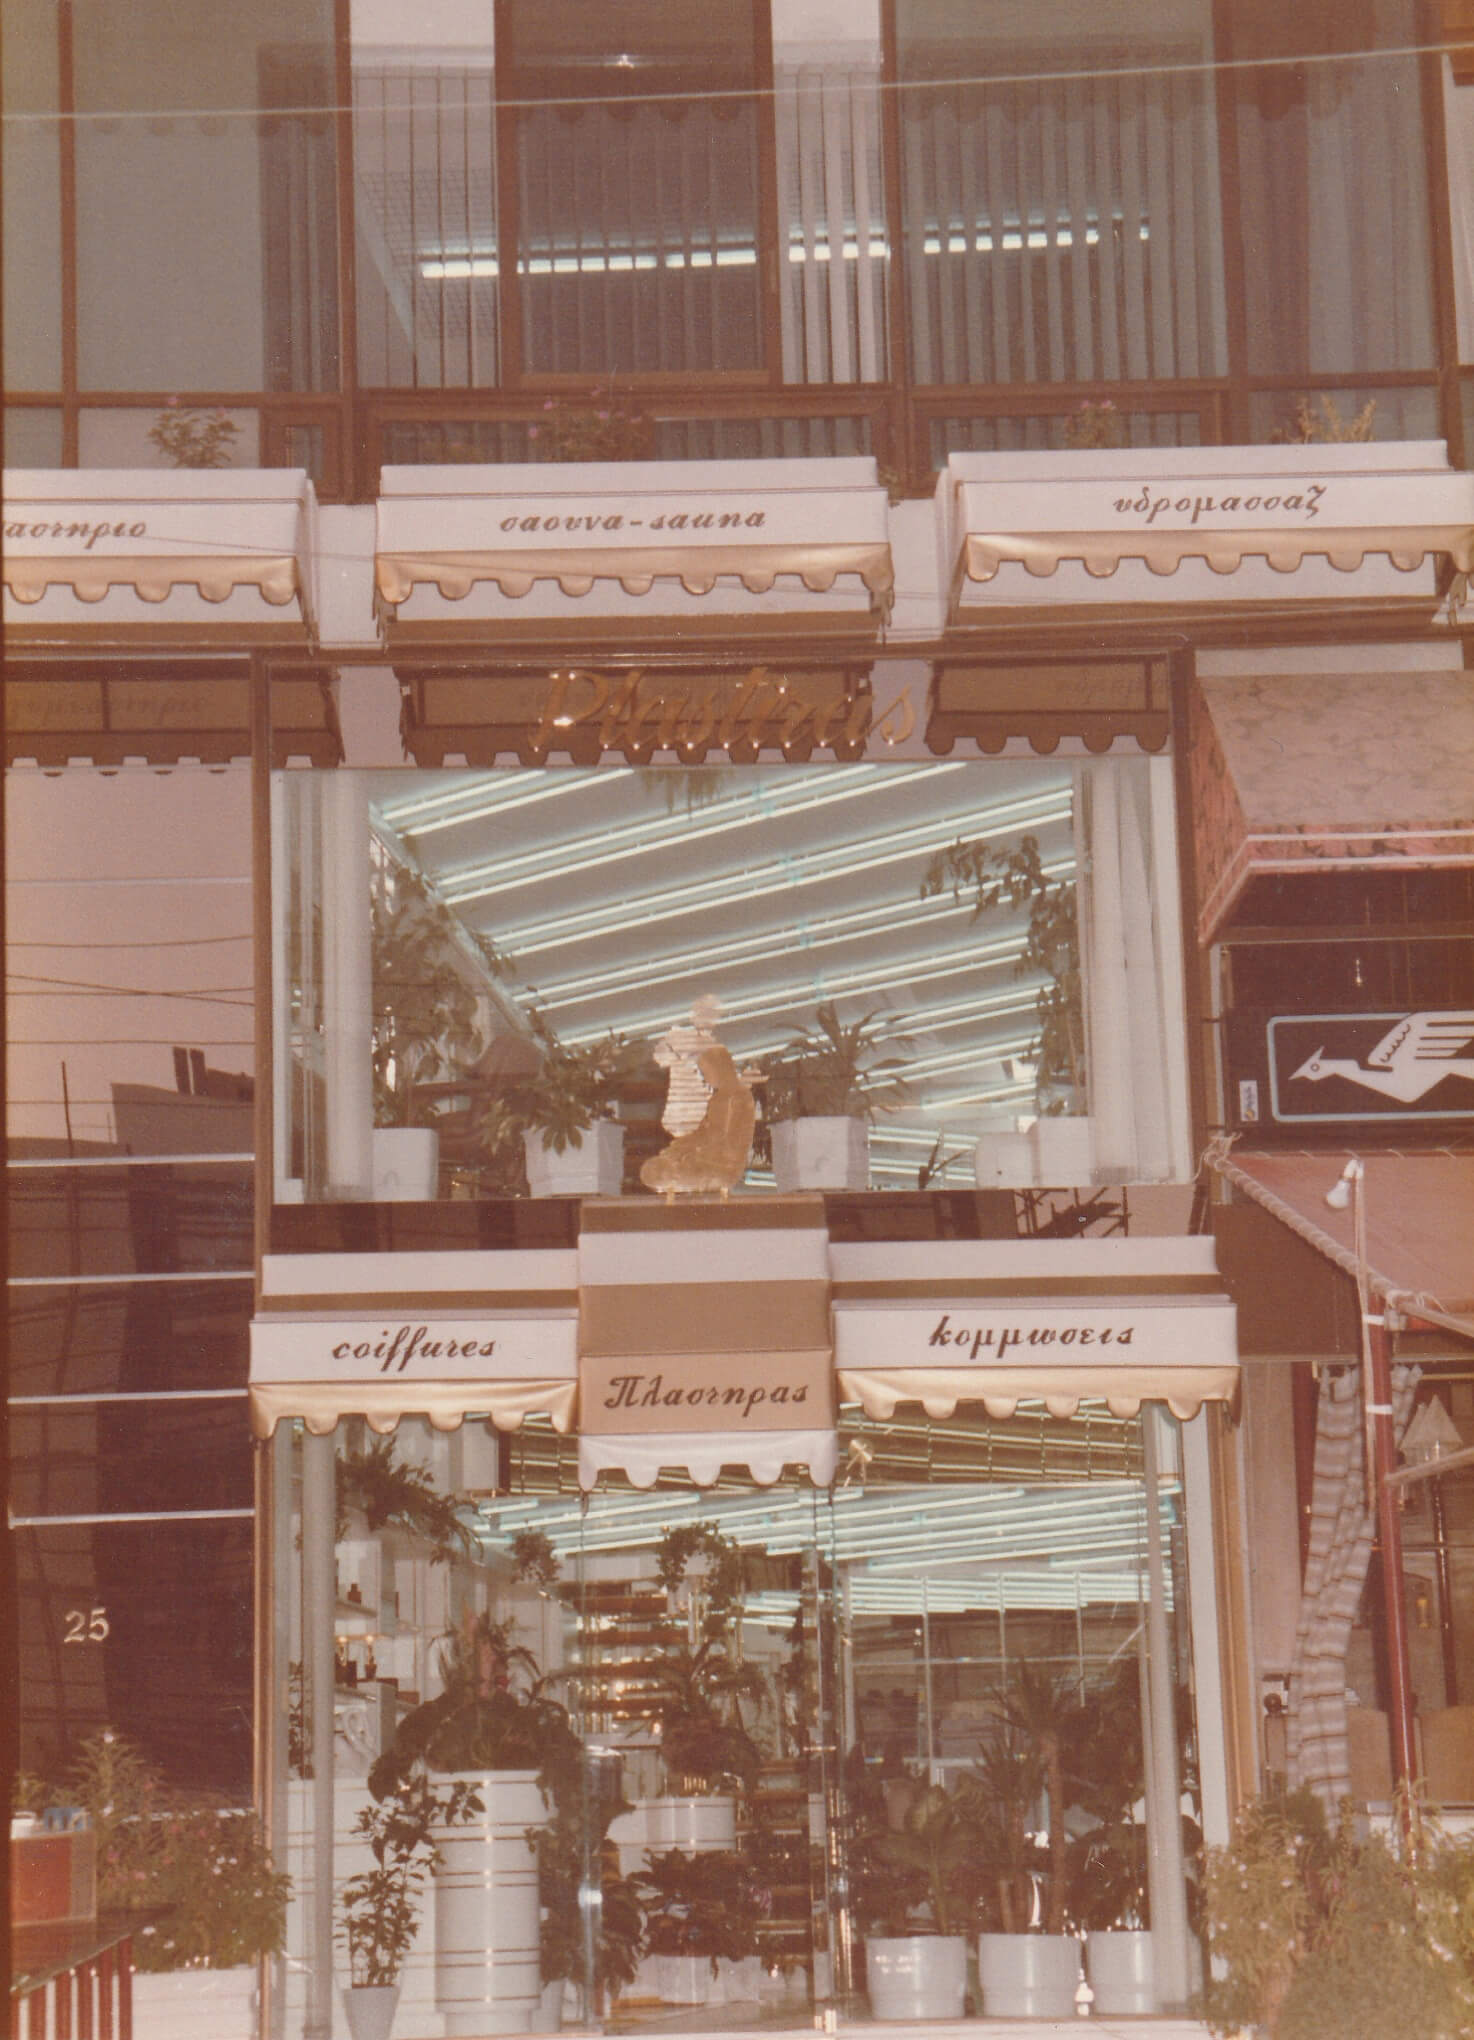 1983 - Creation of a women's section & moving to 25 Ang. Metaxa str.